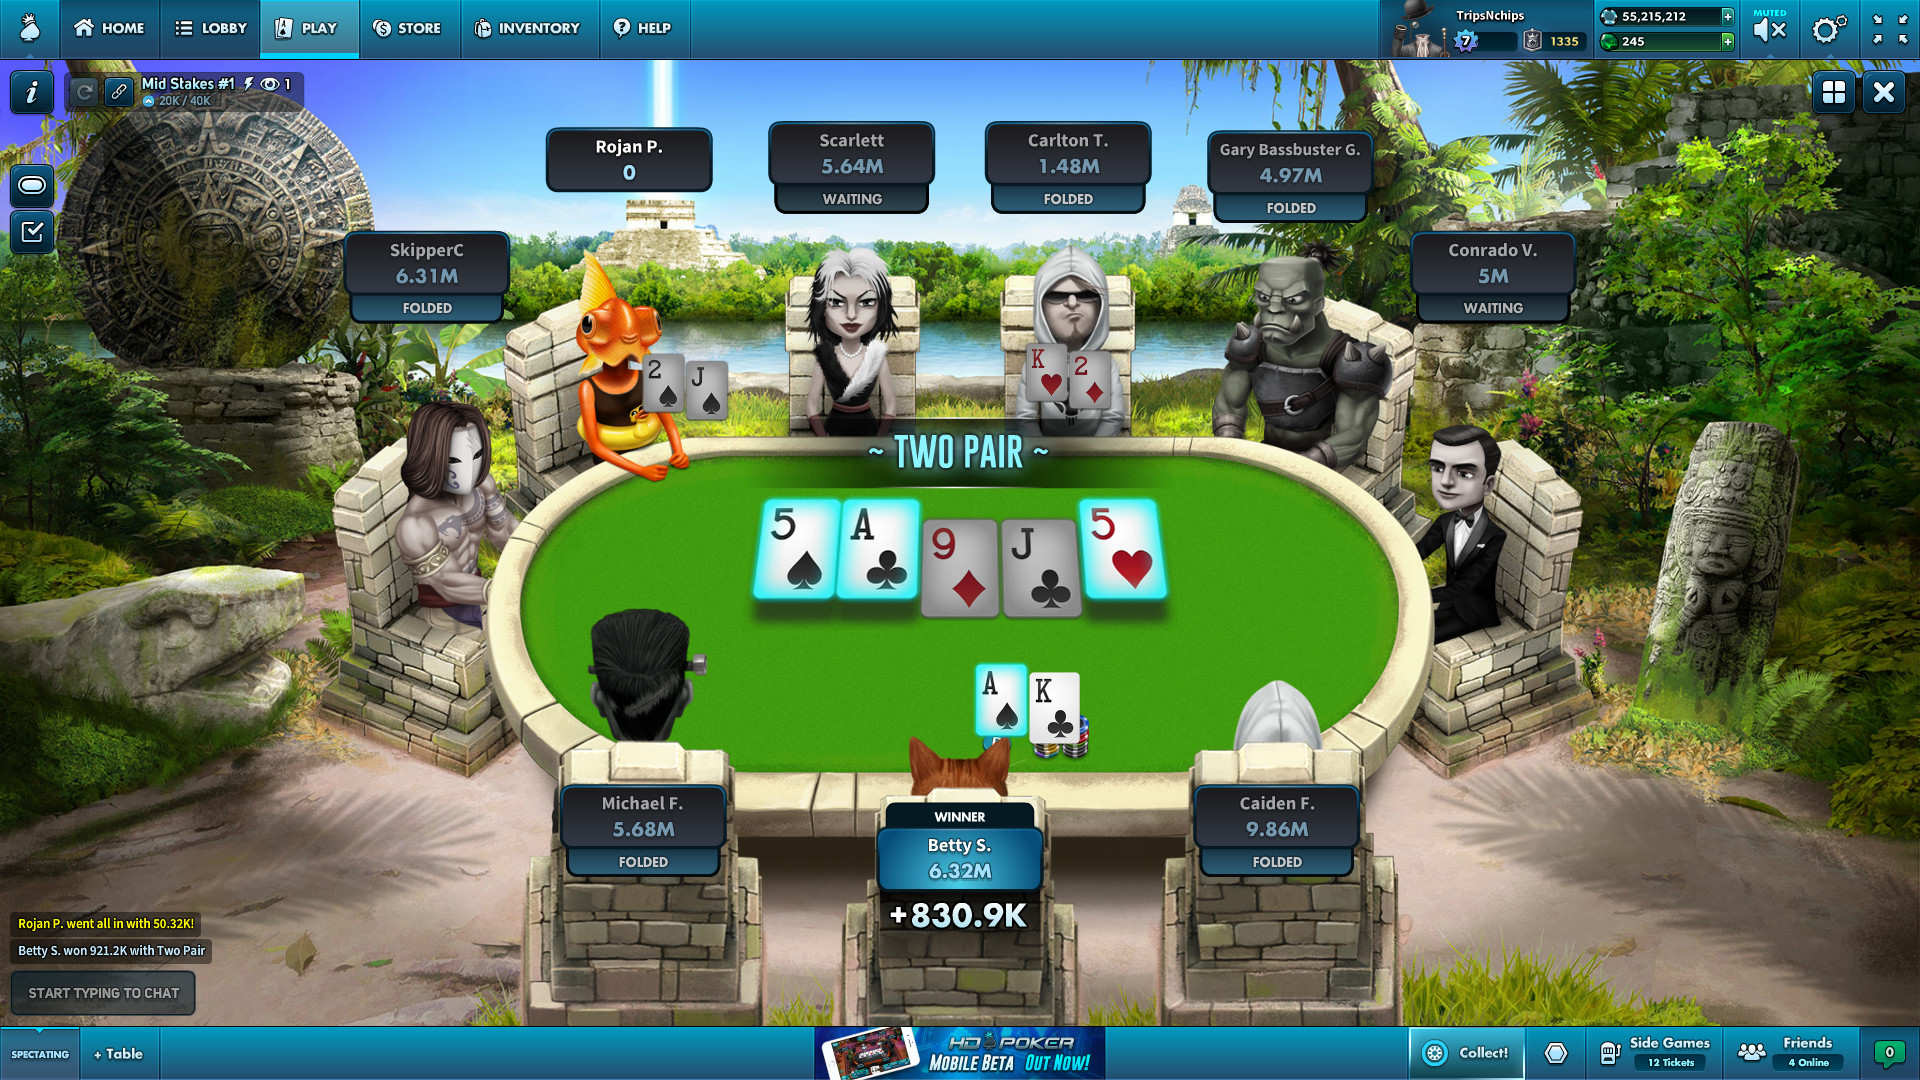 poker texas holdem online with friends